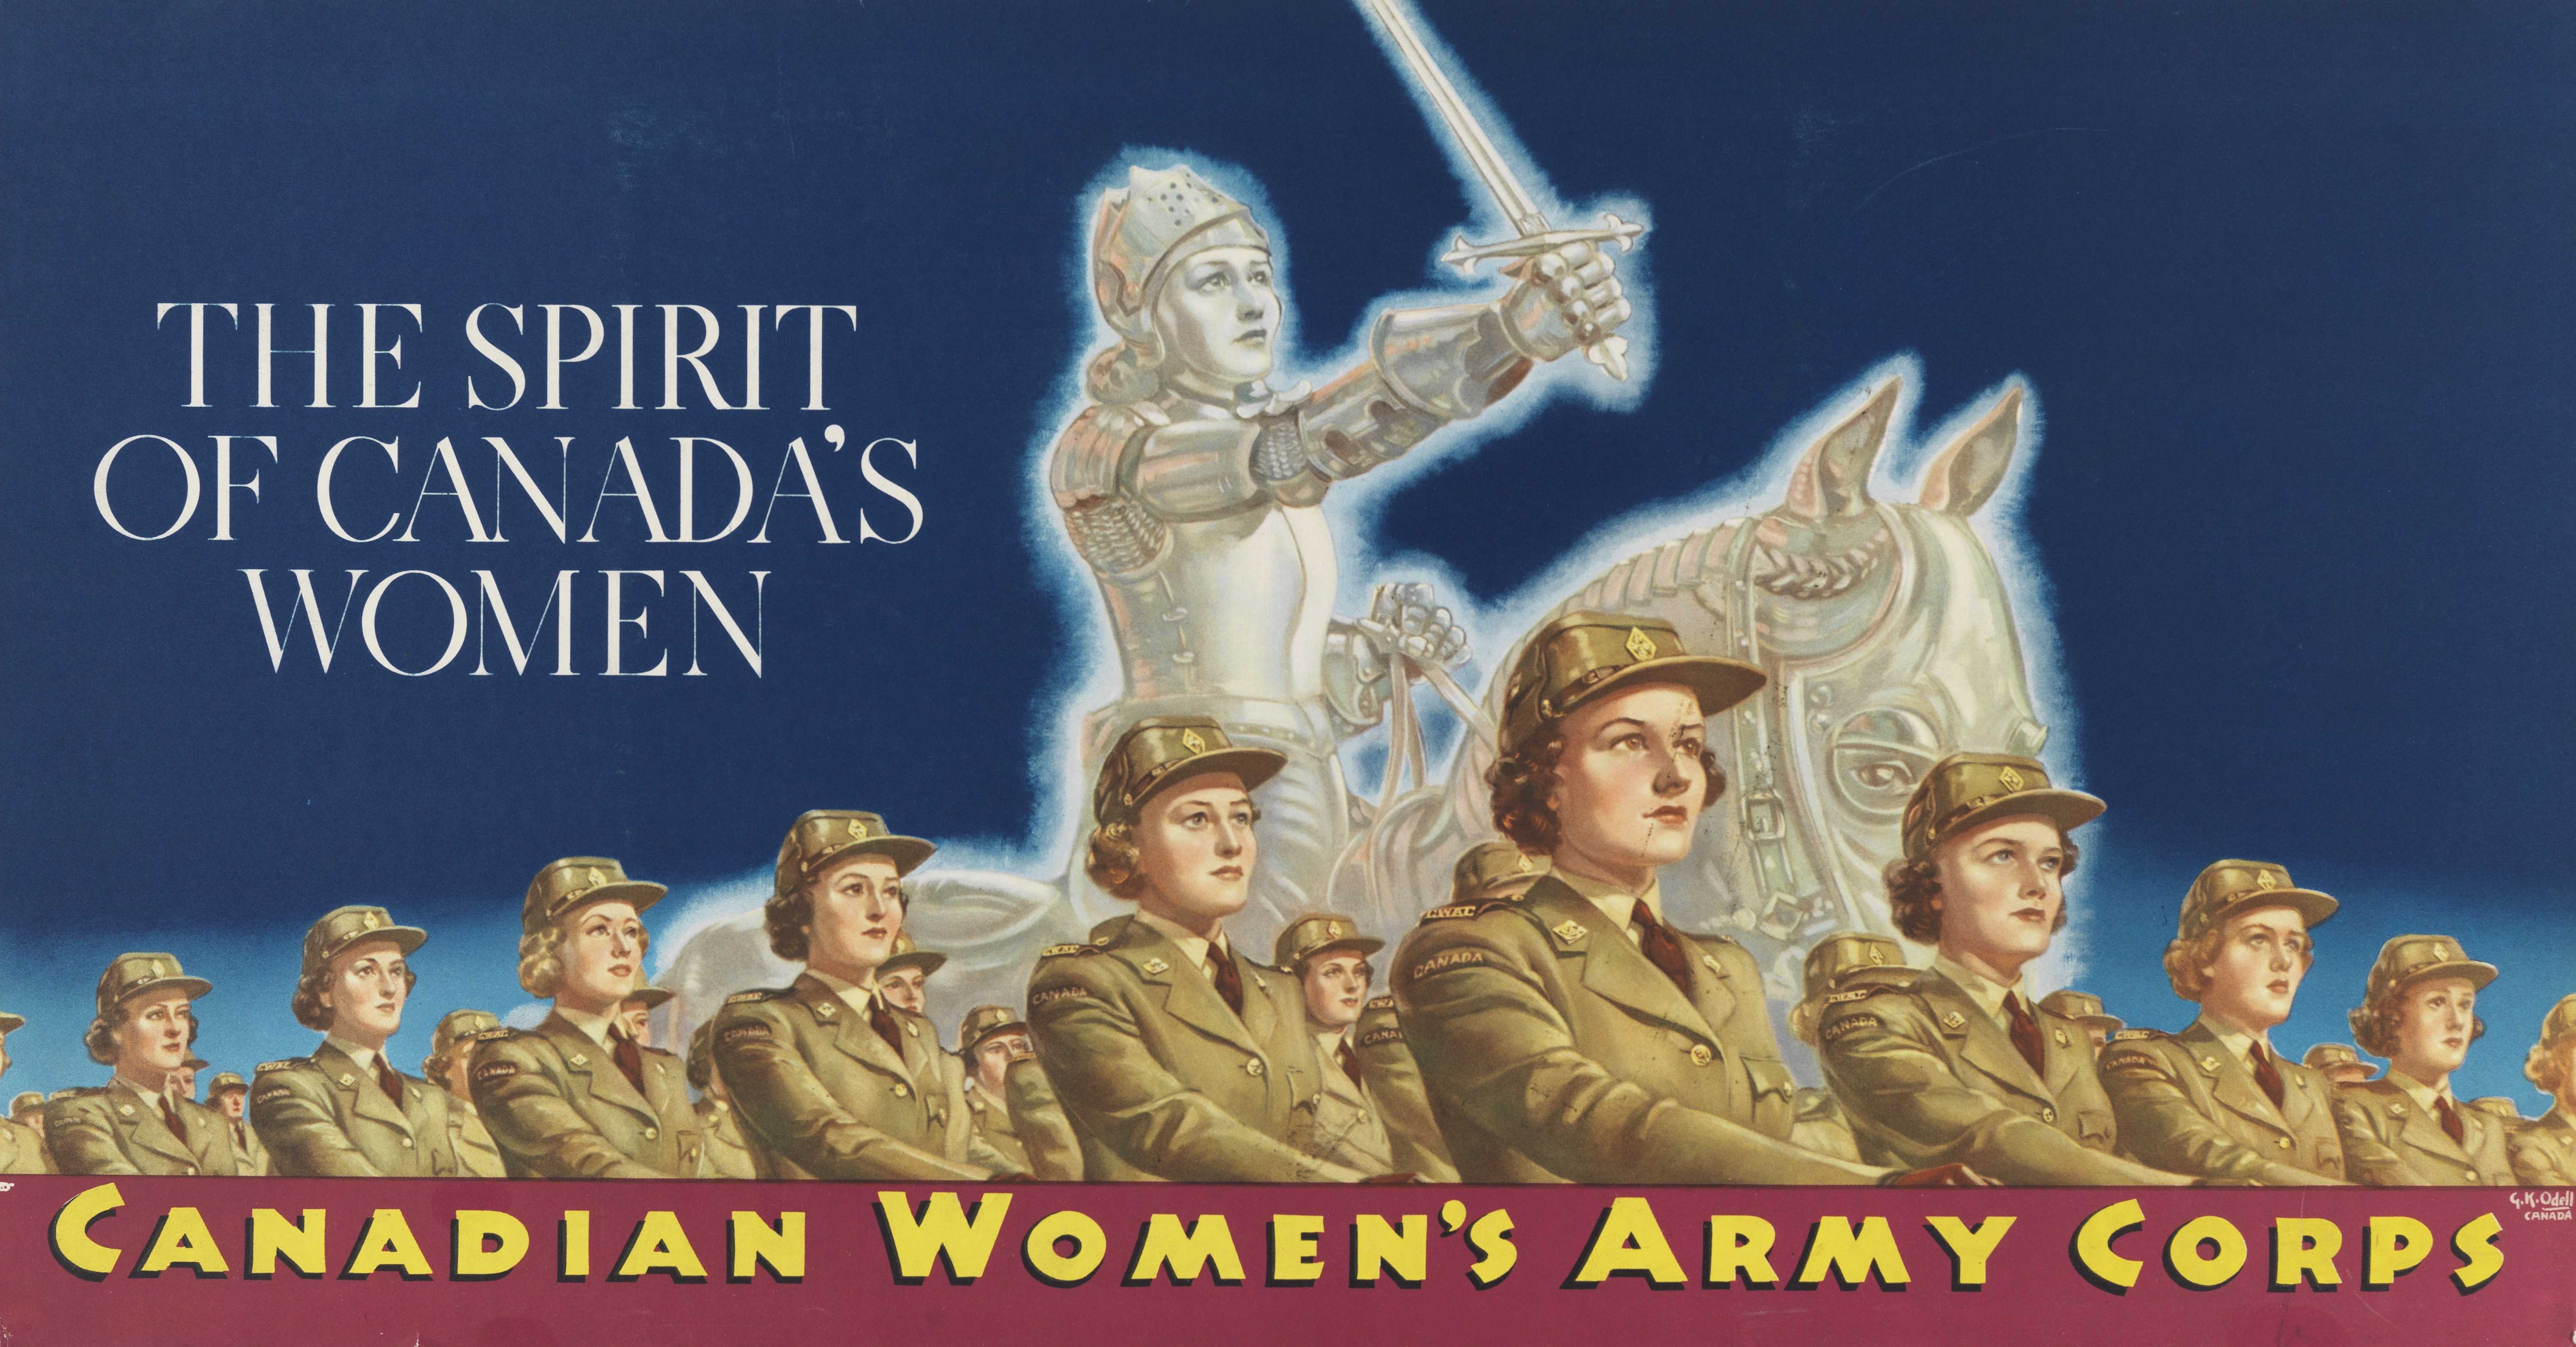 Illustrated poster, colour. Women in uniforms march in rows. A glowing representation of French heroine Joan of Arc rides a horse behind them, holding her sword to the sky.